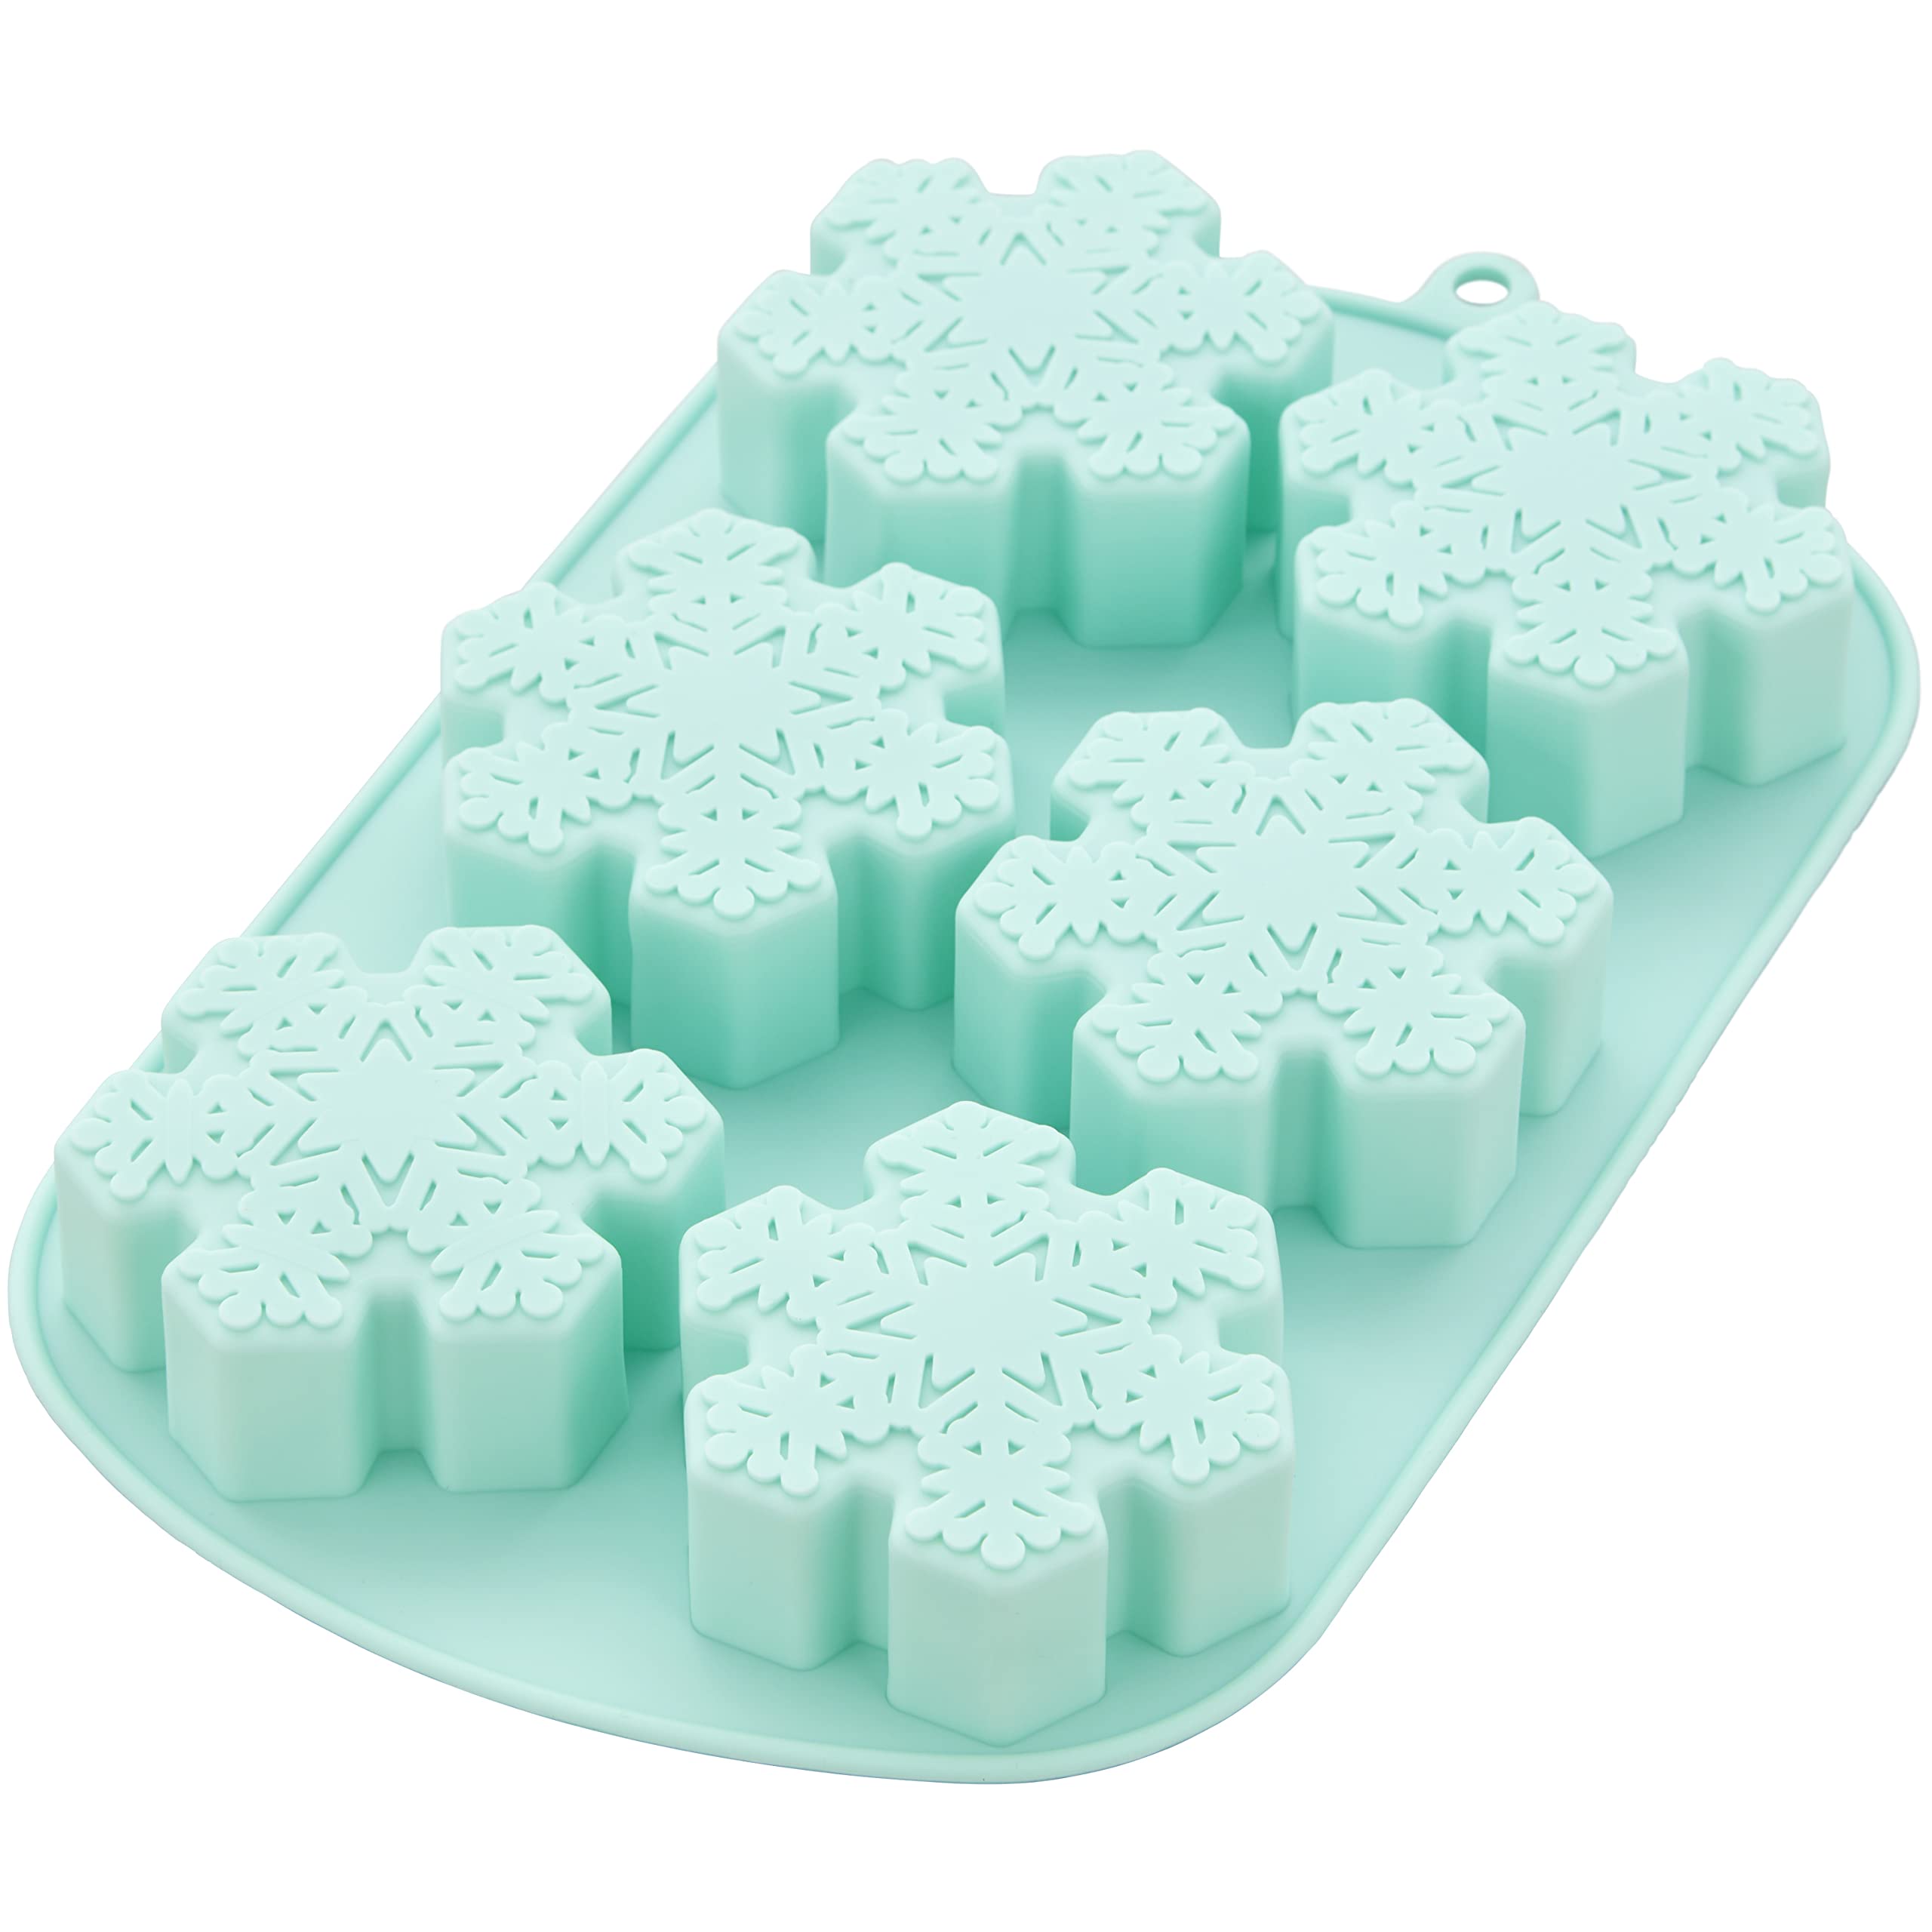 Wilton Winter Snowflake Silicone Baking and Candy Mold, 6-Cavity